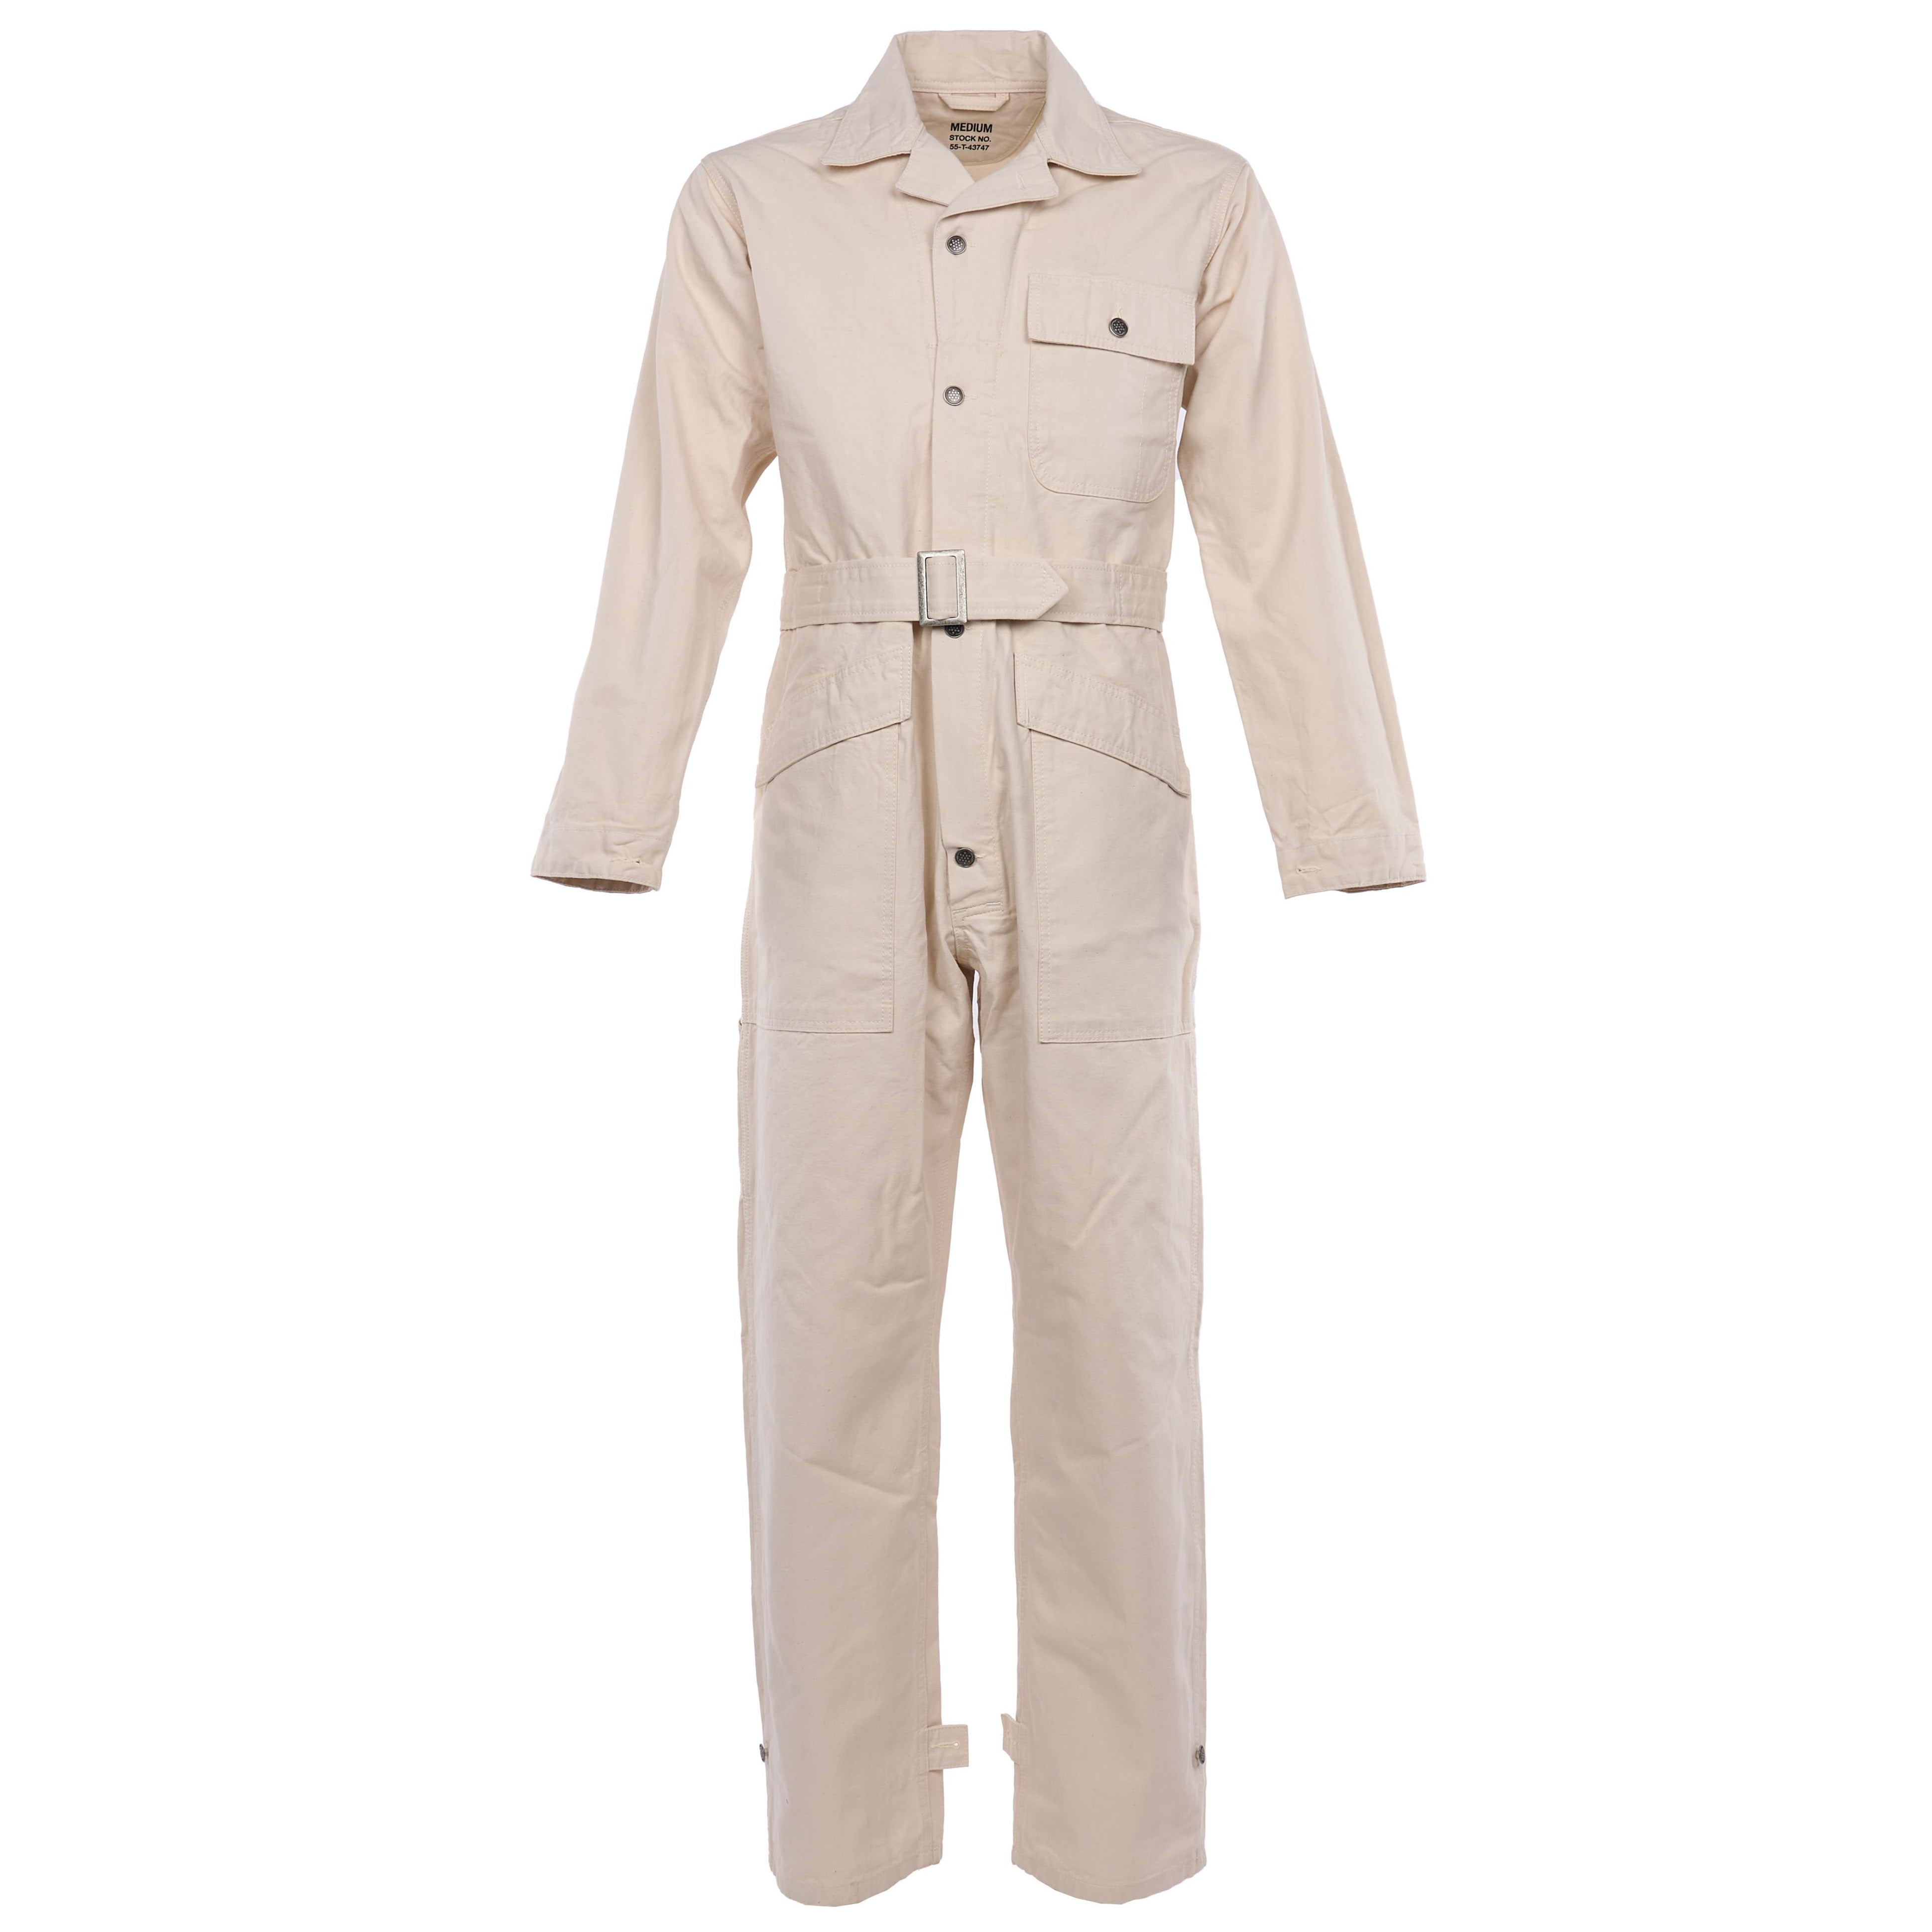 1938 Mechanic Coverall off white